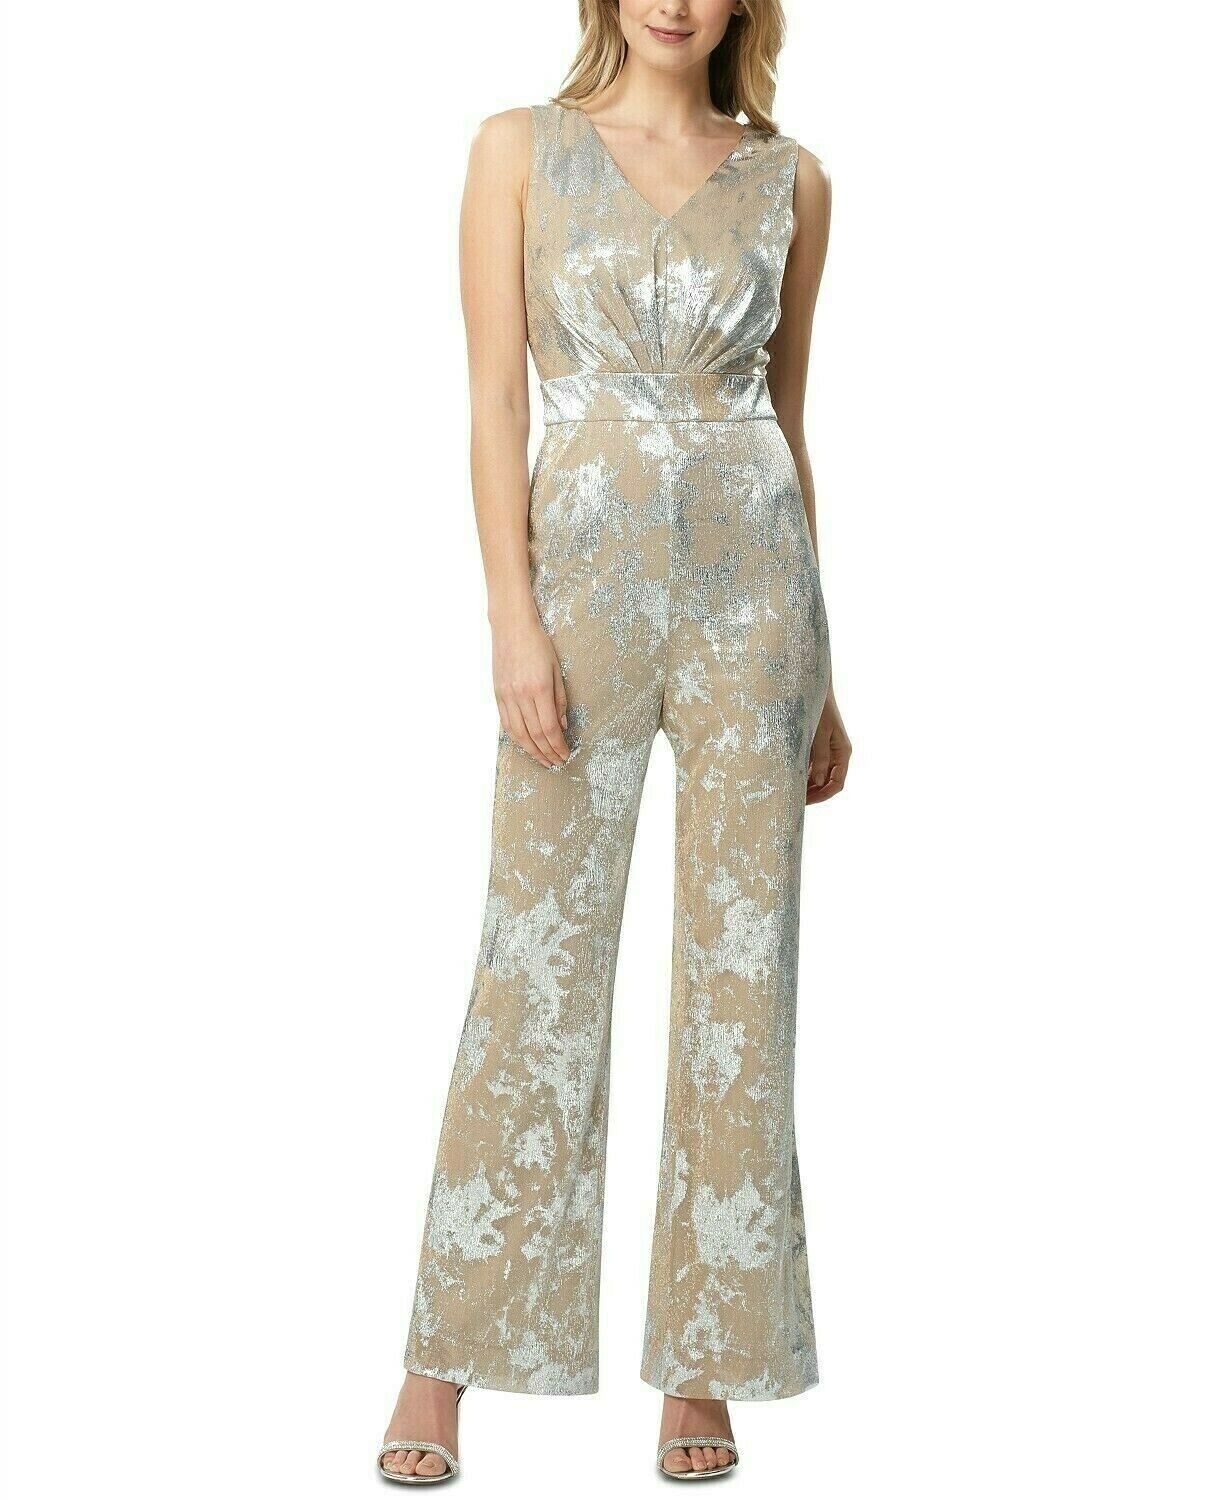 Primary image for Womens Tahari ASL Metallic Party Jumpsuit Champange Silver Party B4HP